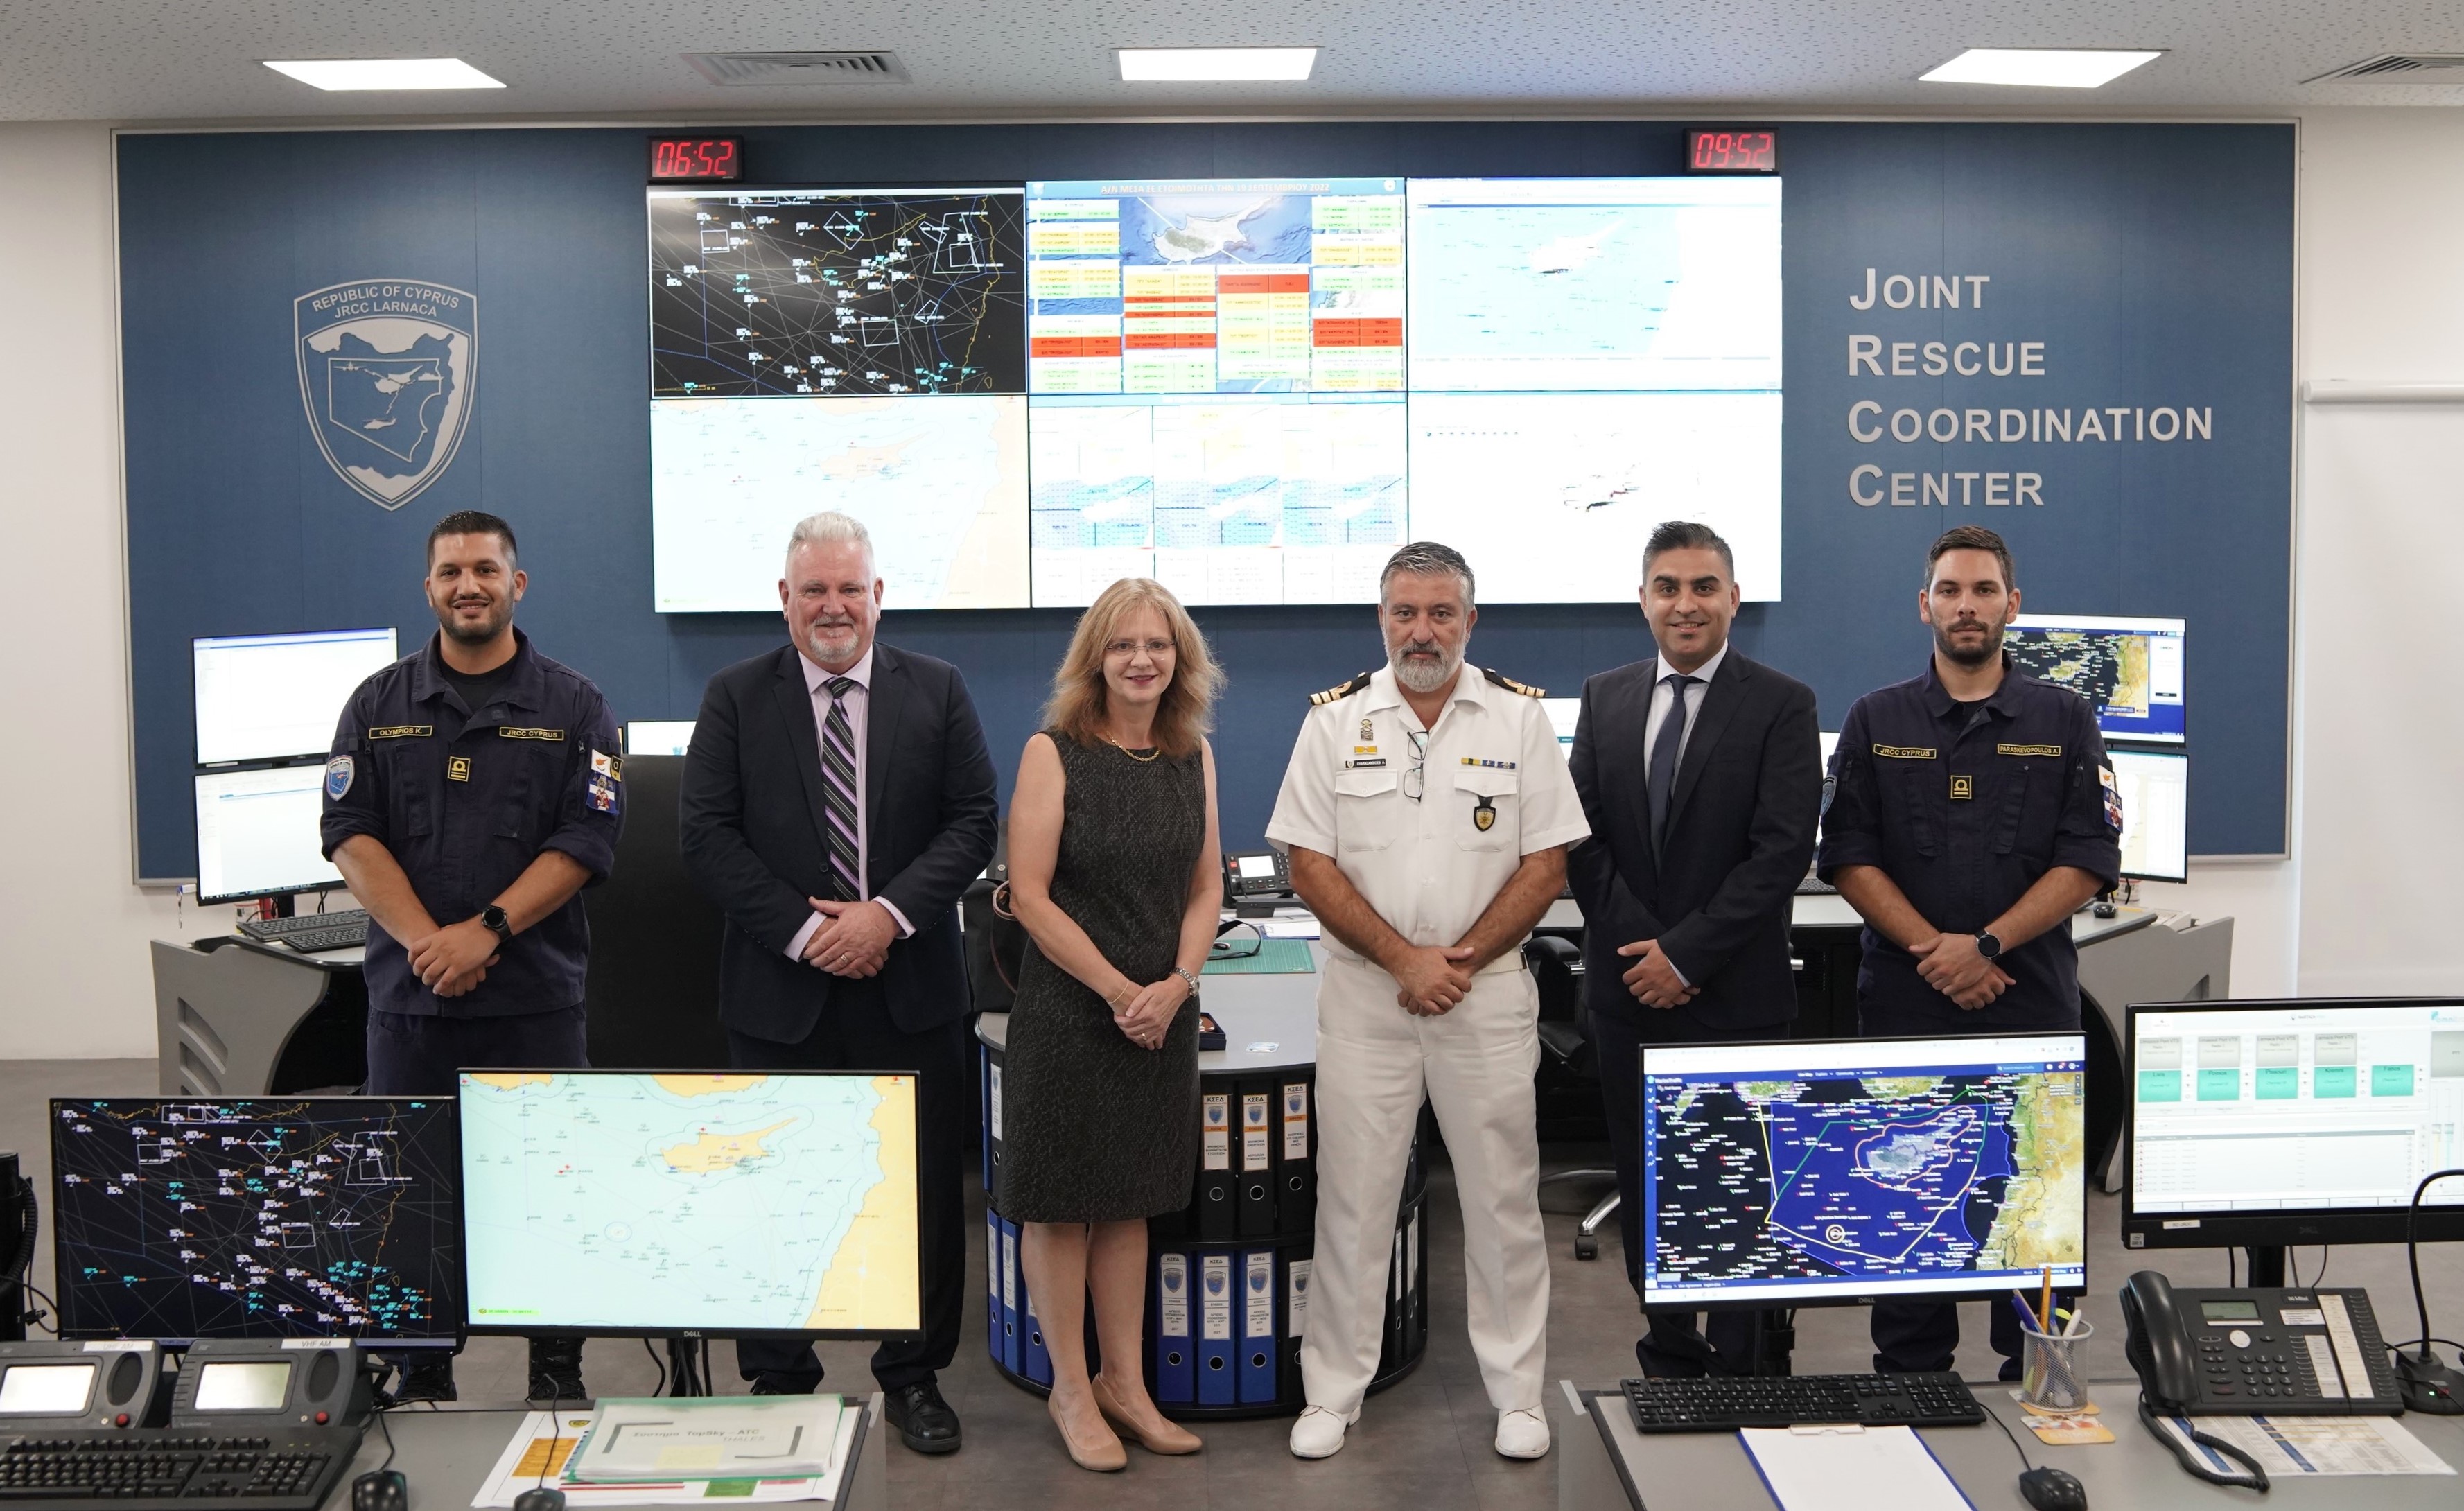 THE HIGH COMMISSIONER OF AUSTRALIA IN CYPRUS VISITS THE JRCC